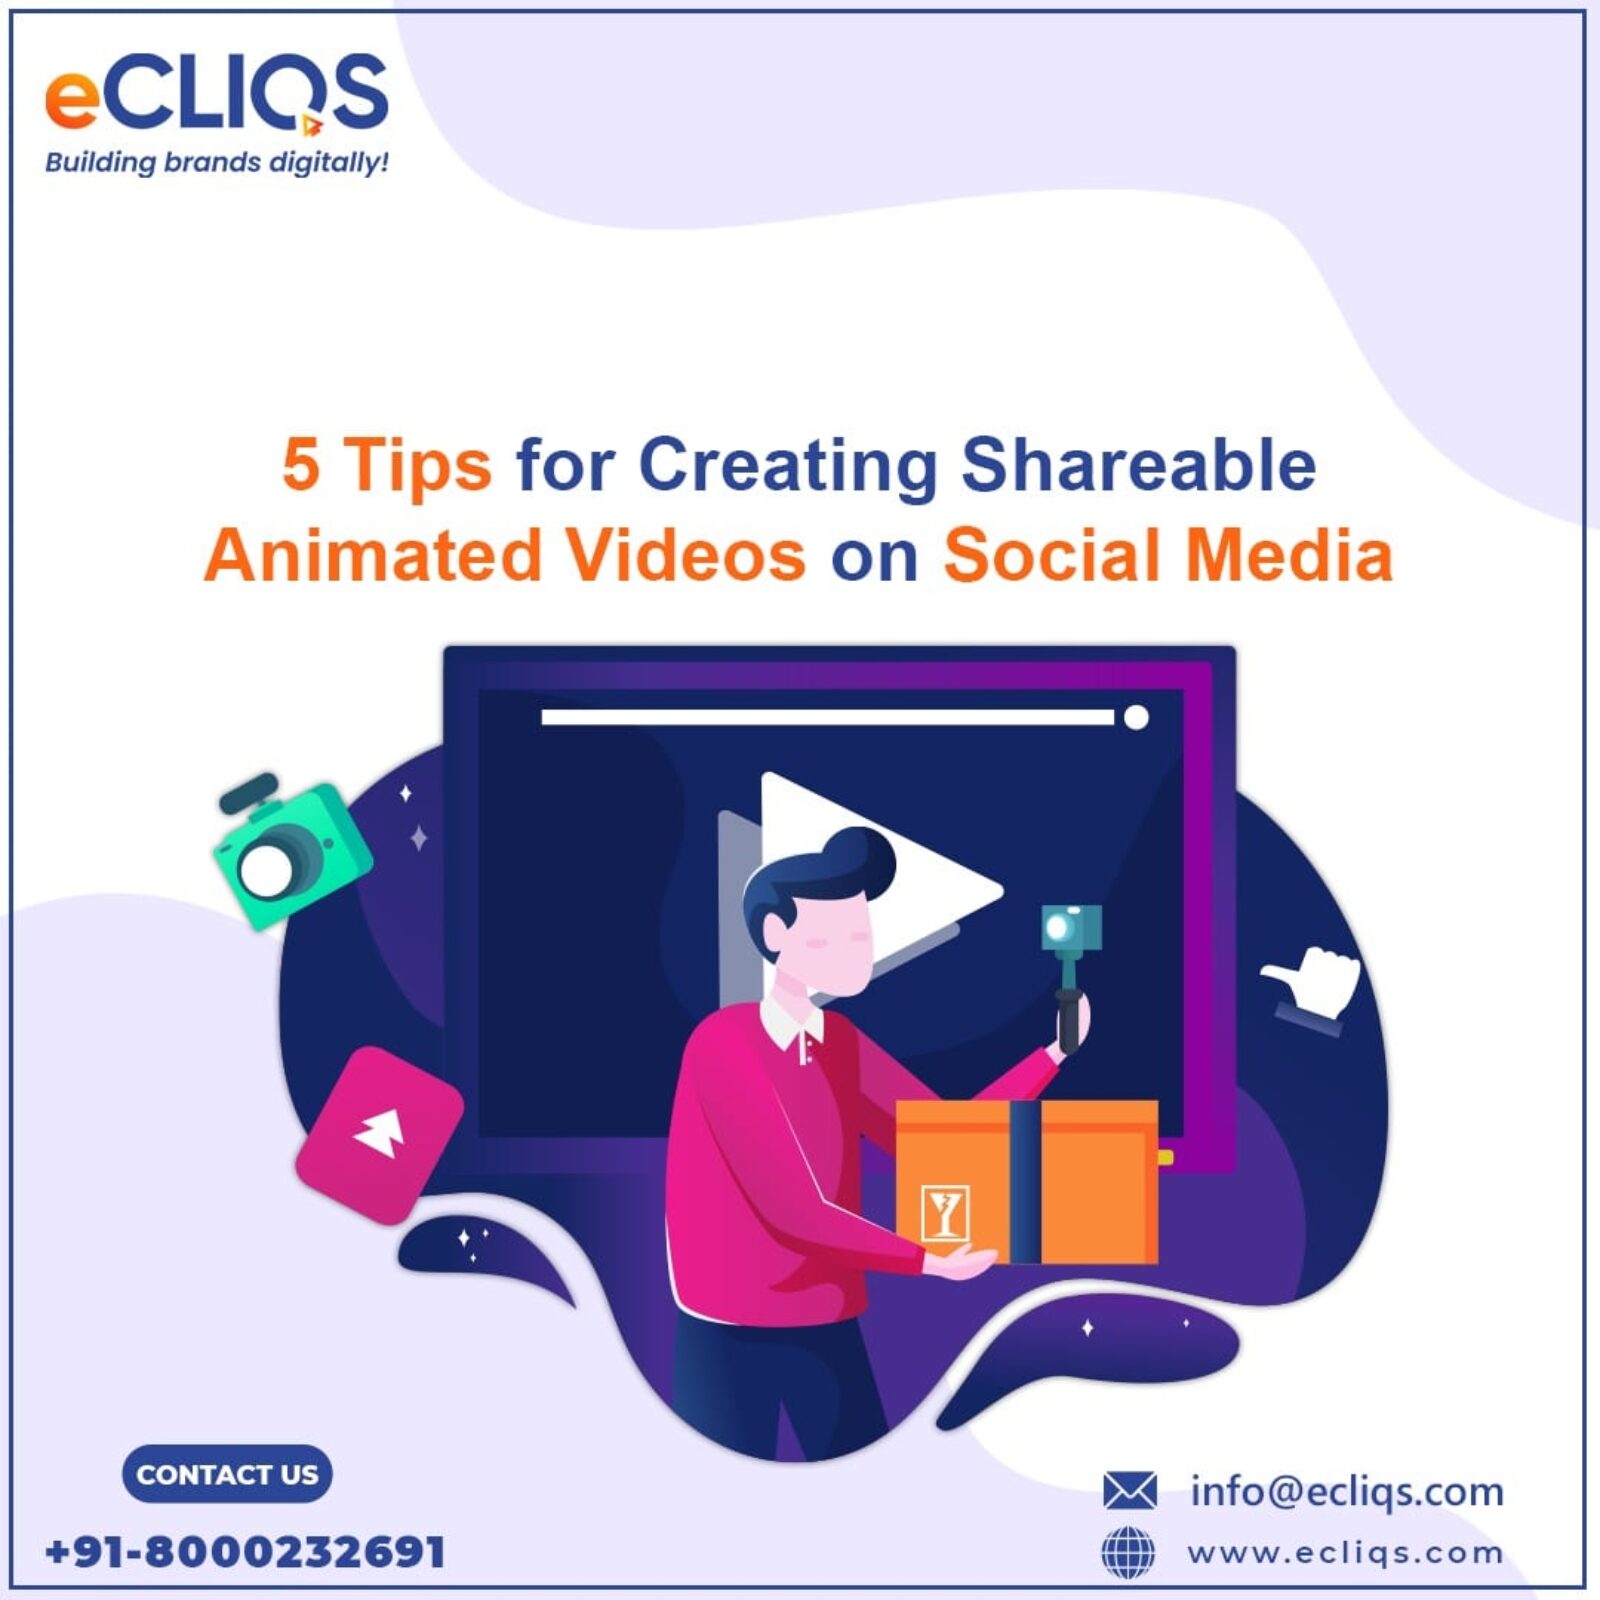 5 Tips for Creating Shareable Animated Videos on Social Media